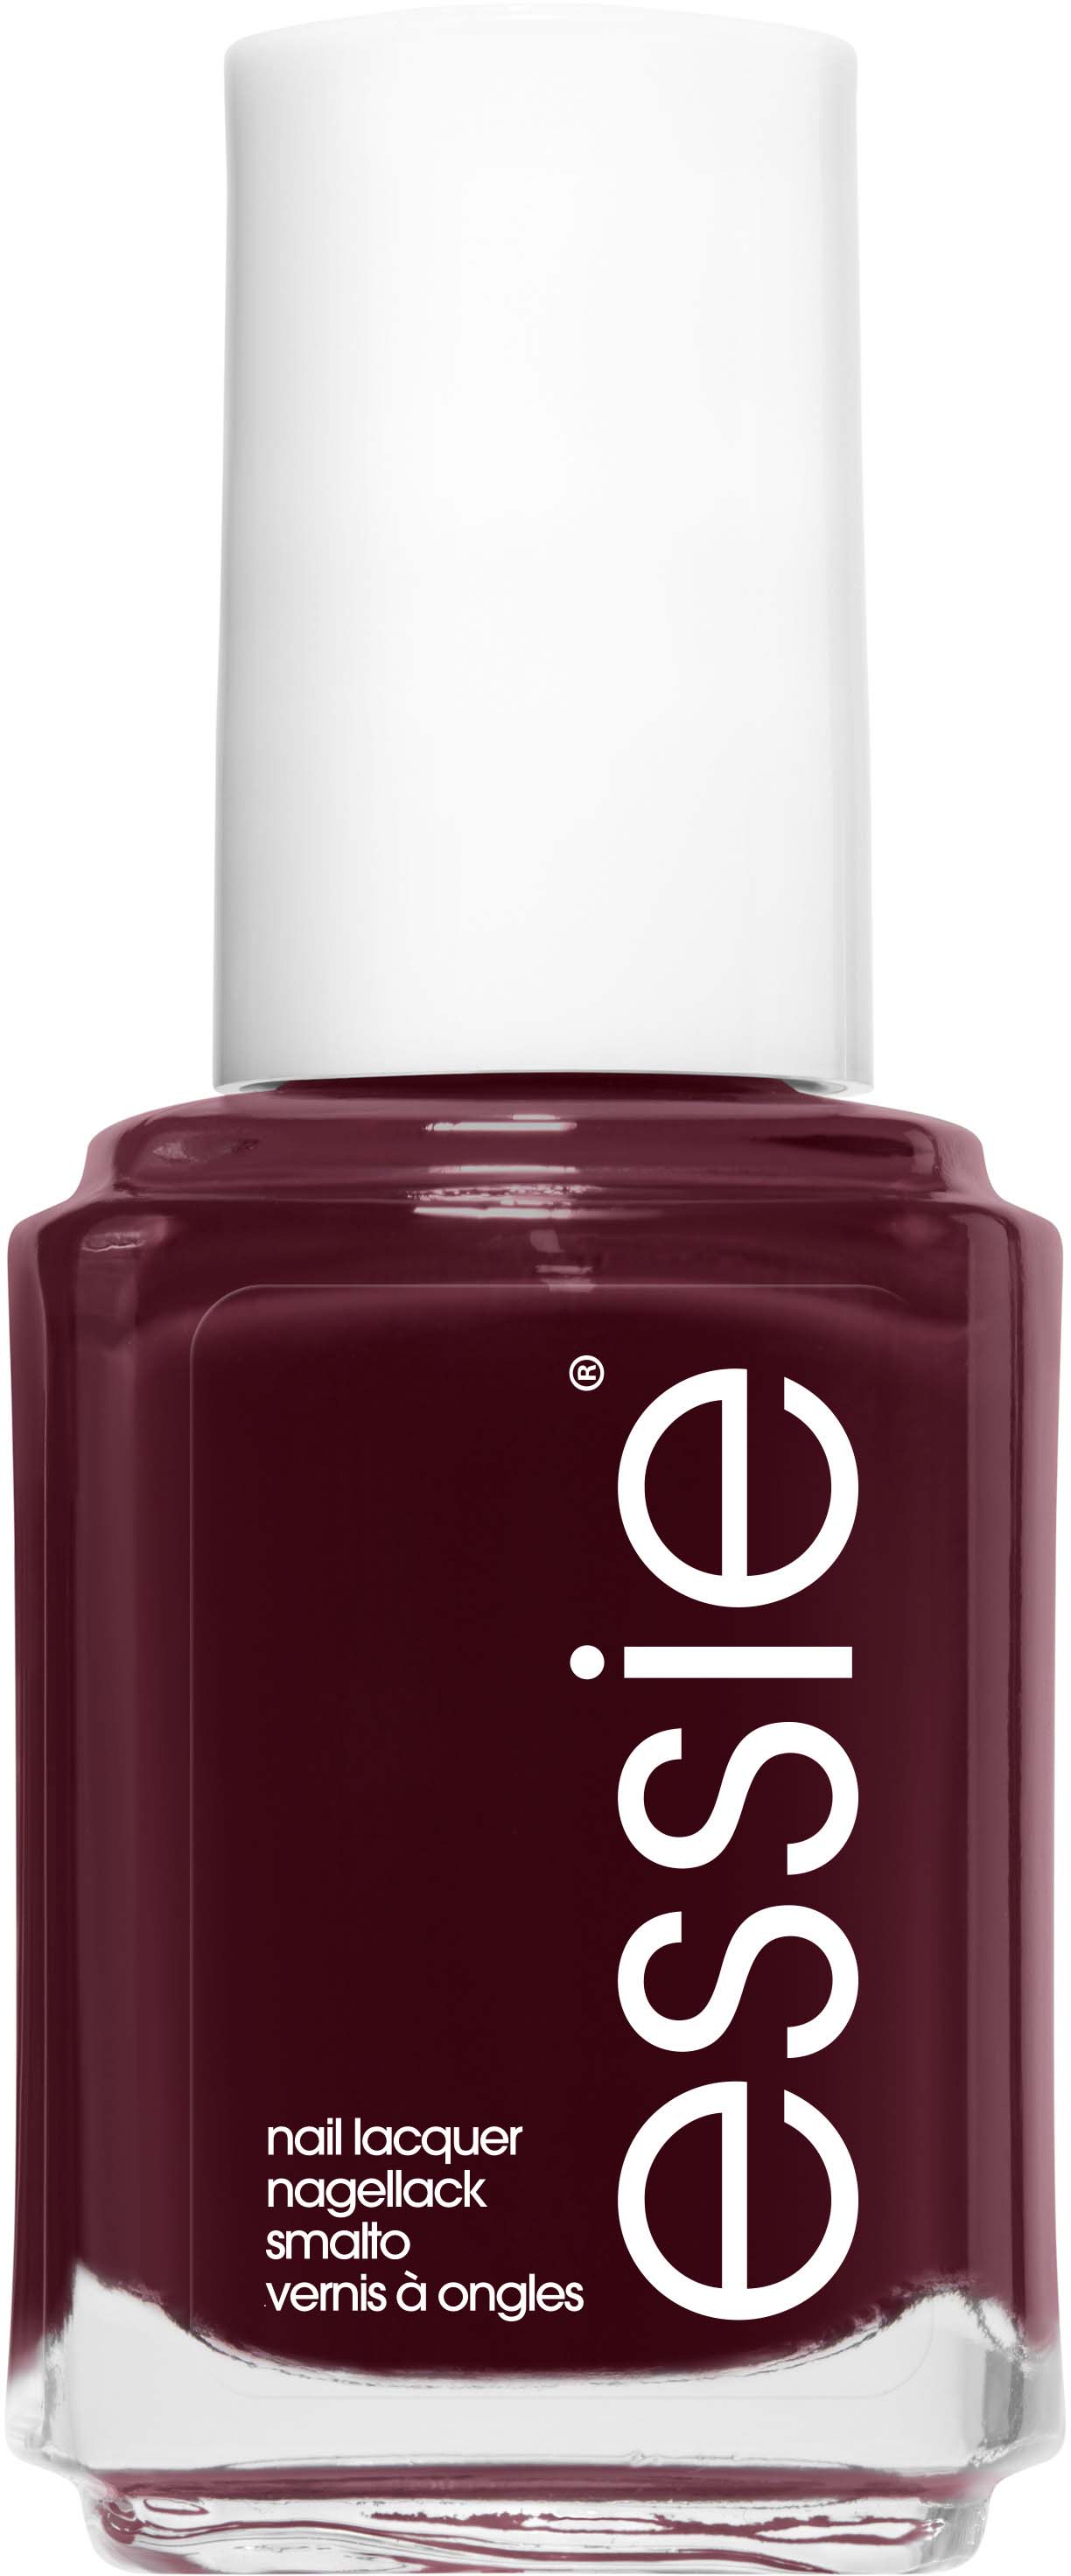 Darling Nail 282 Shearling Essie Lacquer